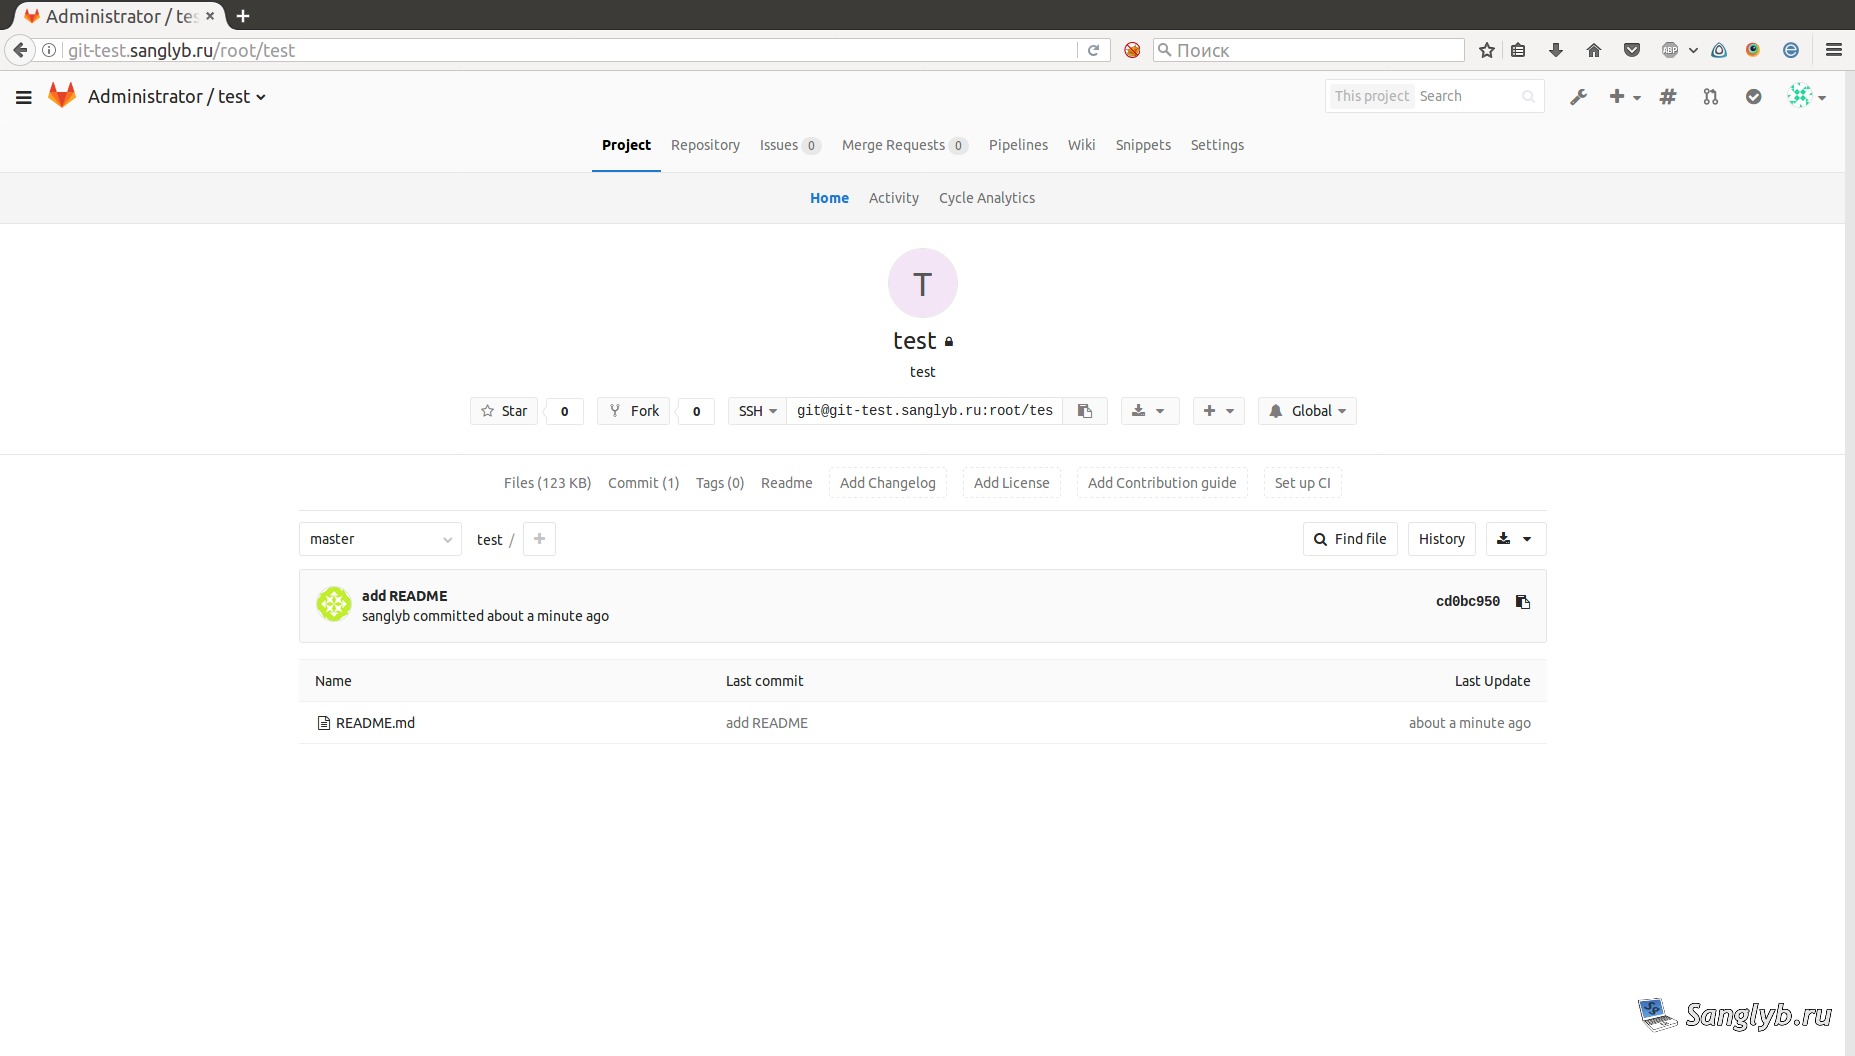 changed gitlab project